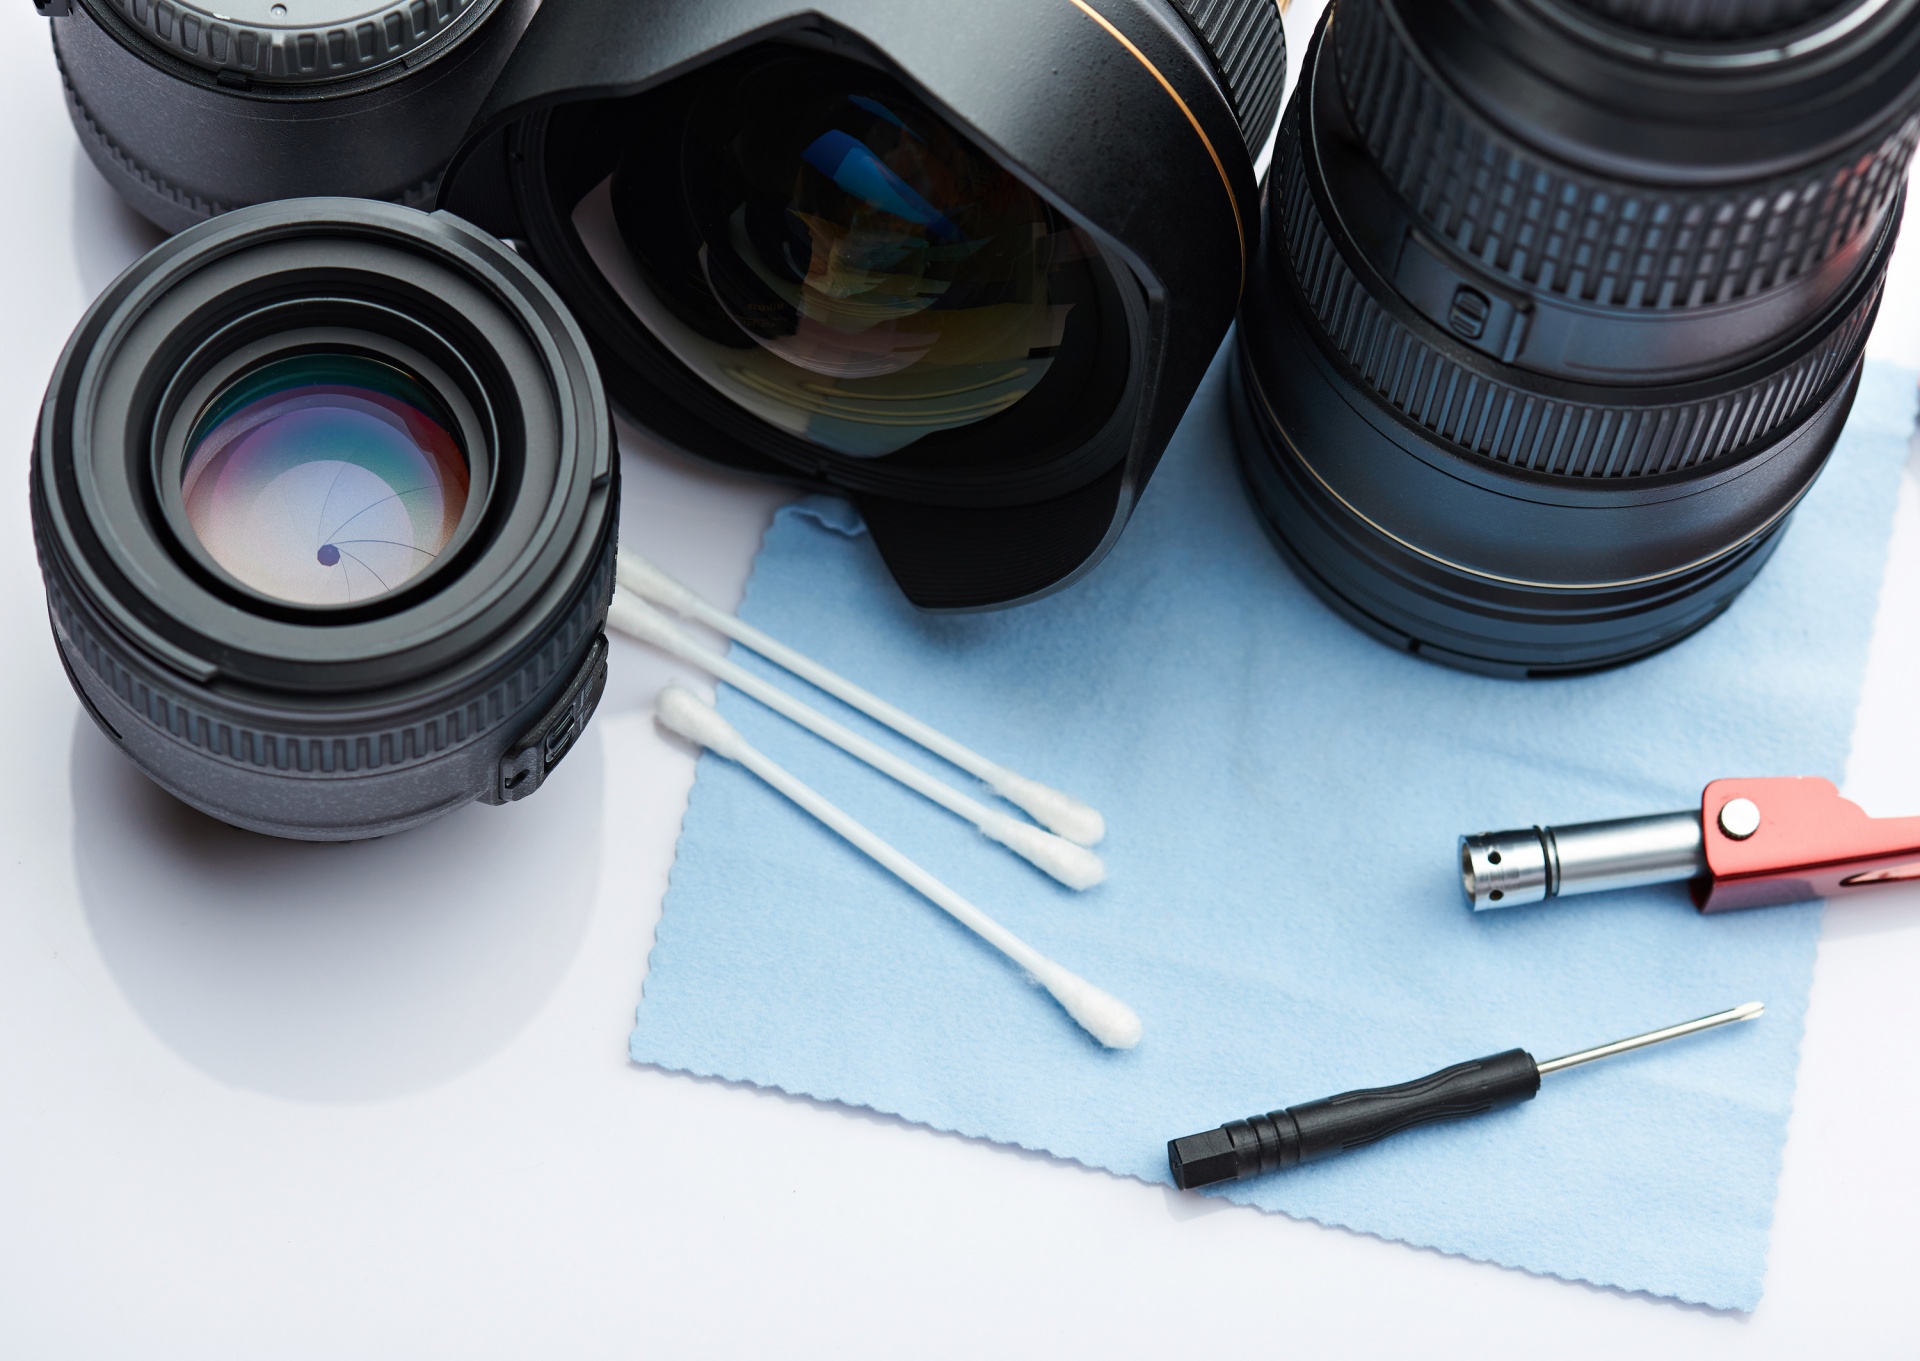 camera equipment and q tip cleaning supplies